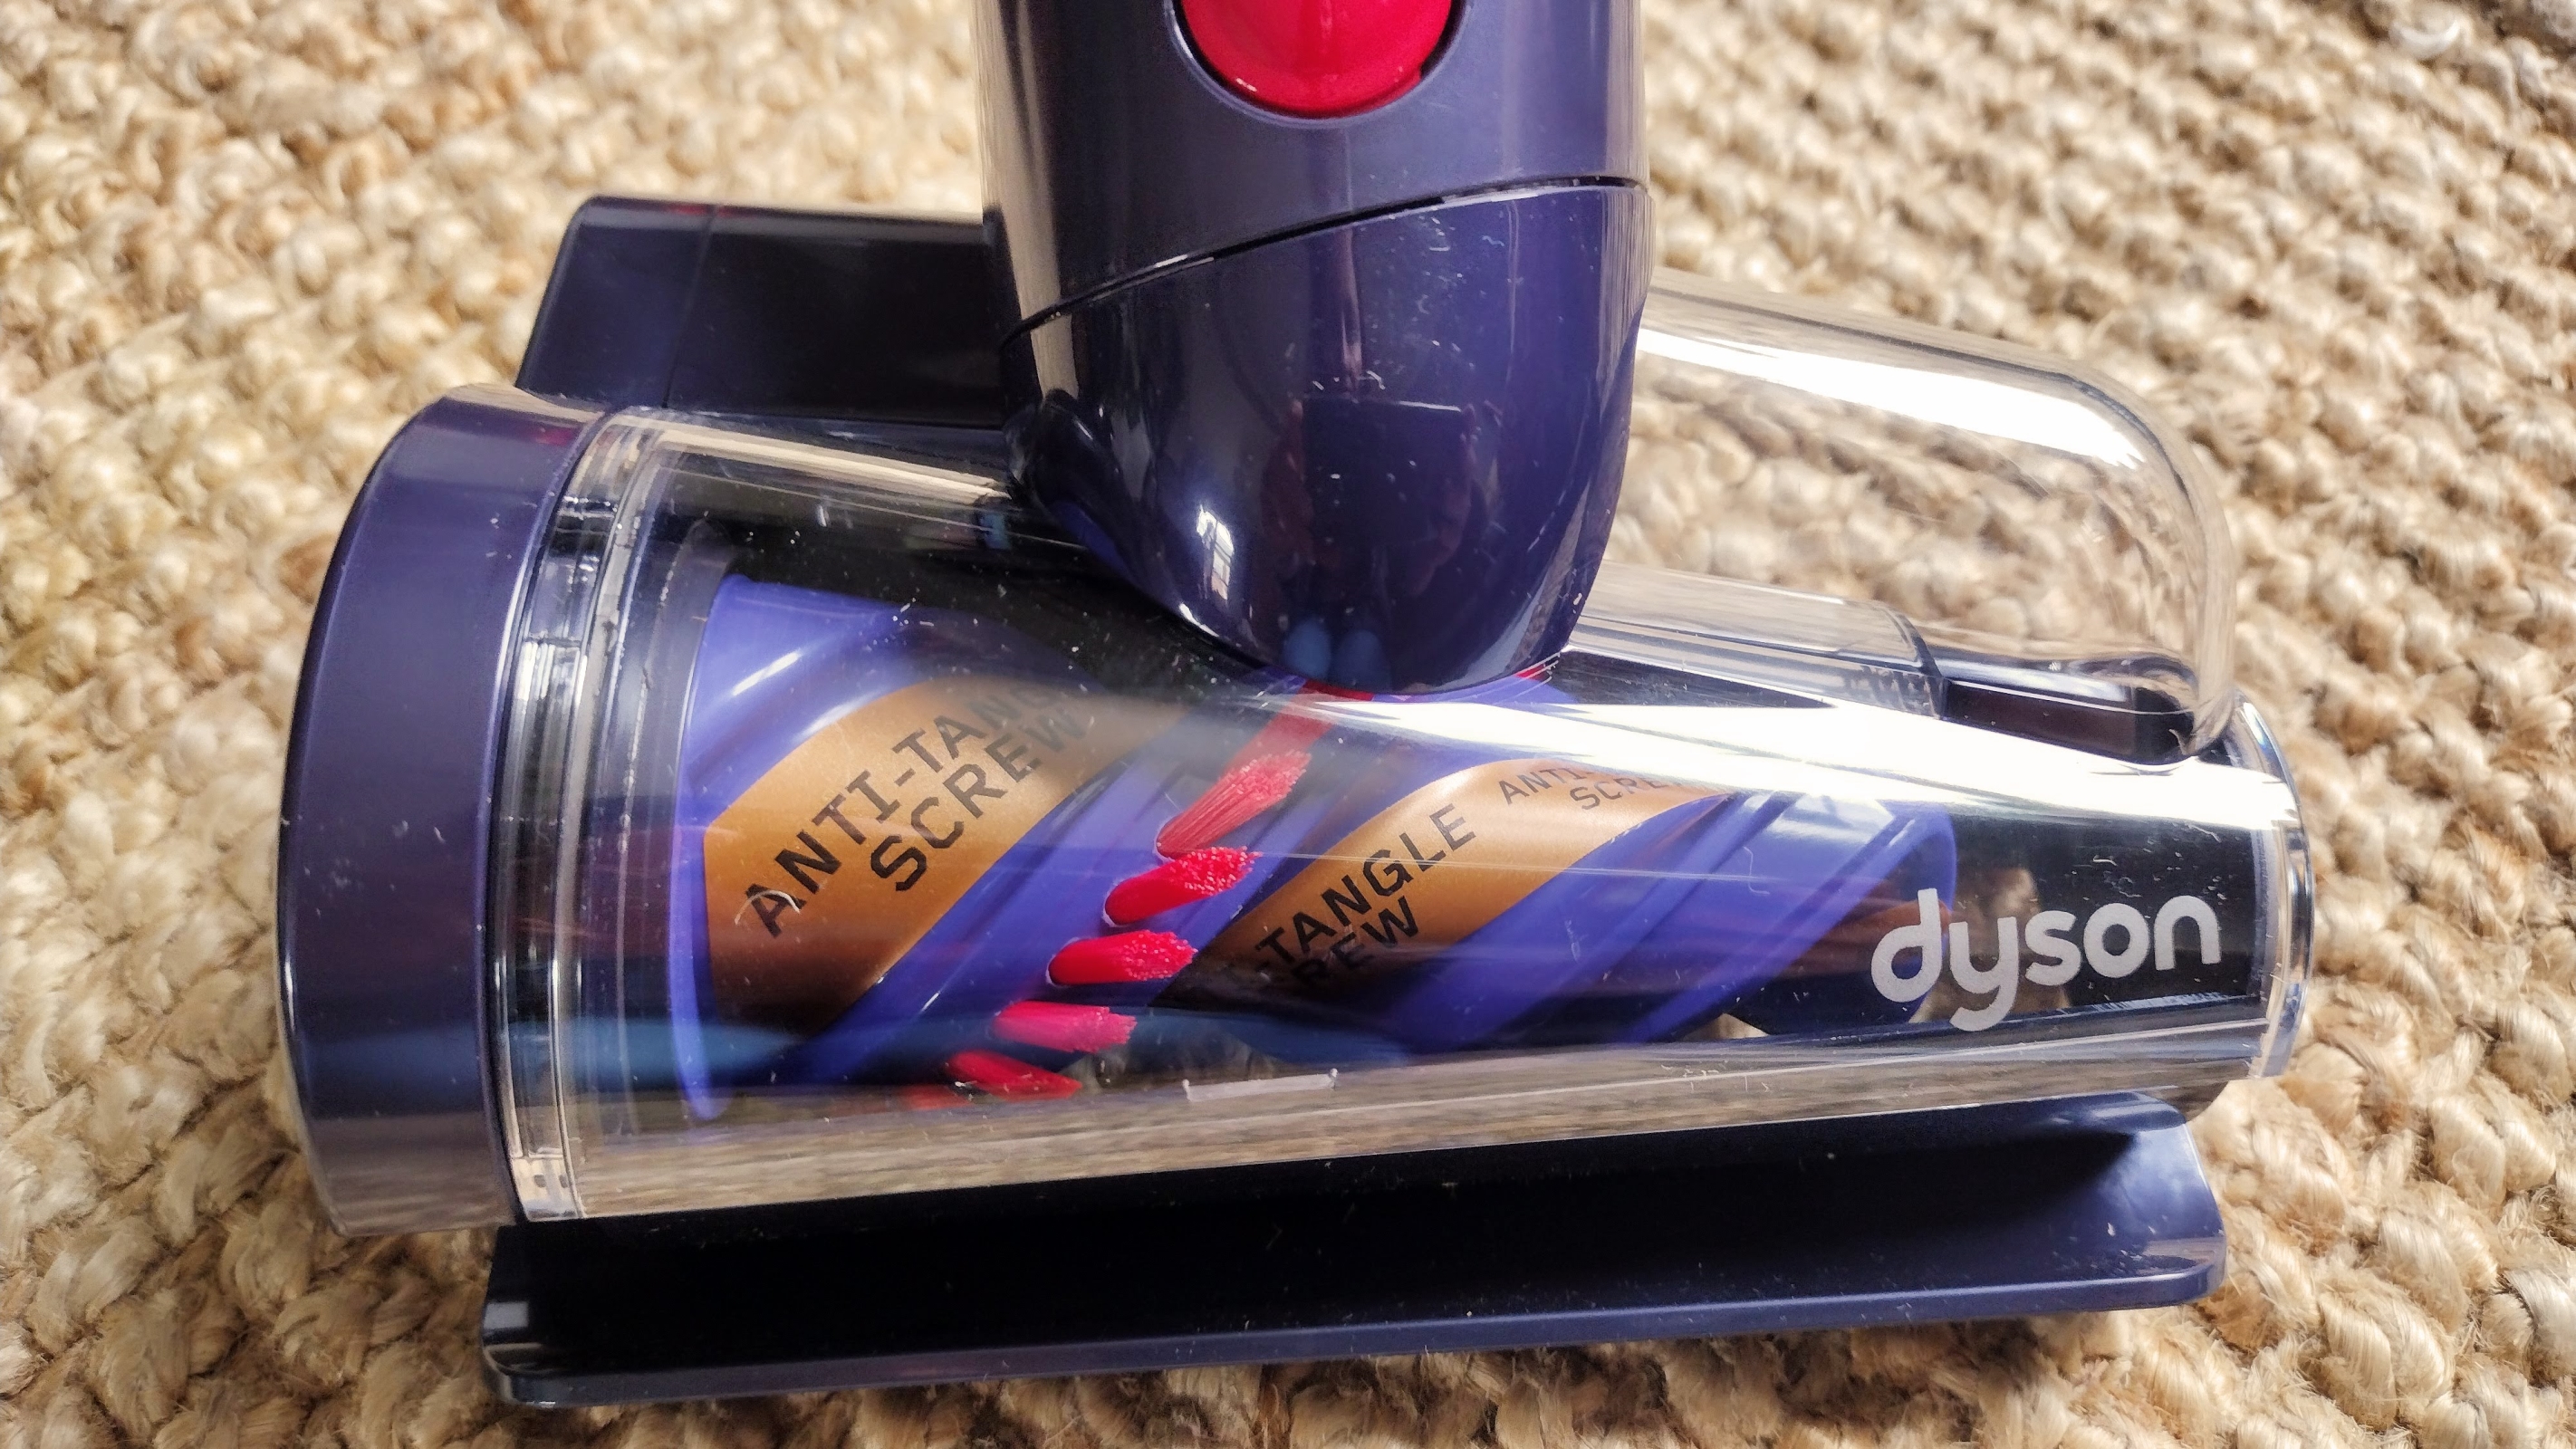 Dyson Cyclone V10: Save $80 on an allergen-busting cordless